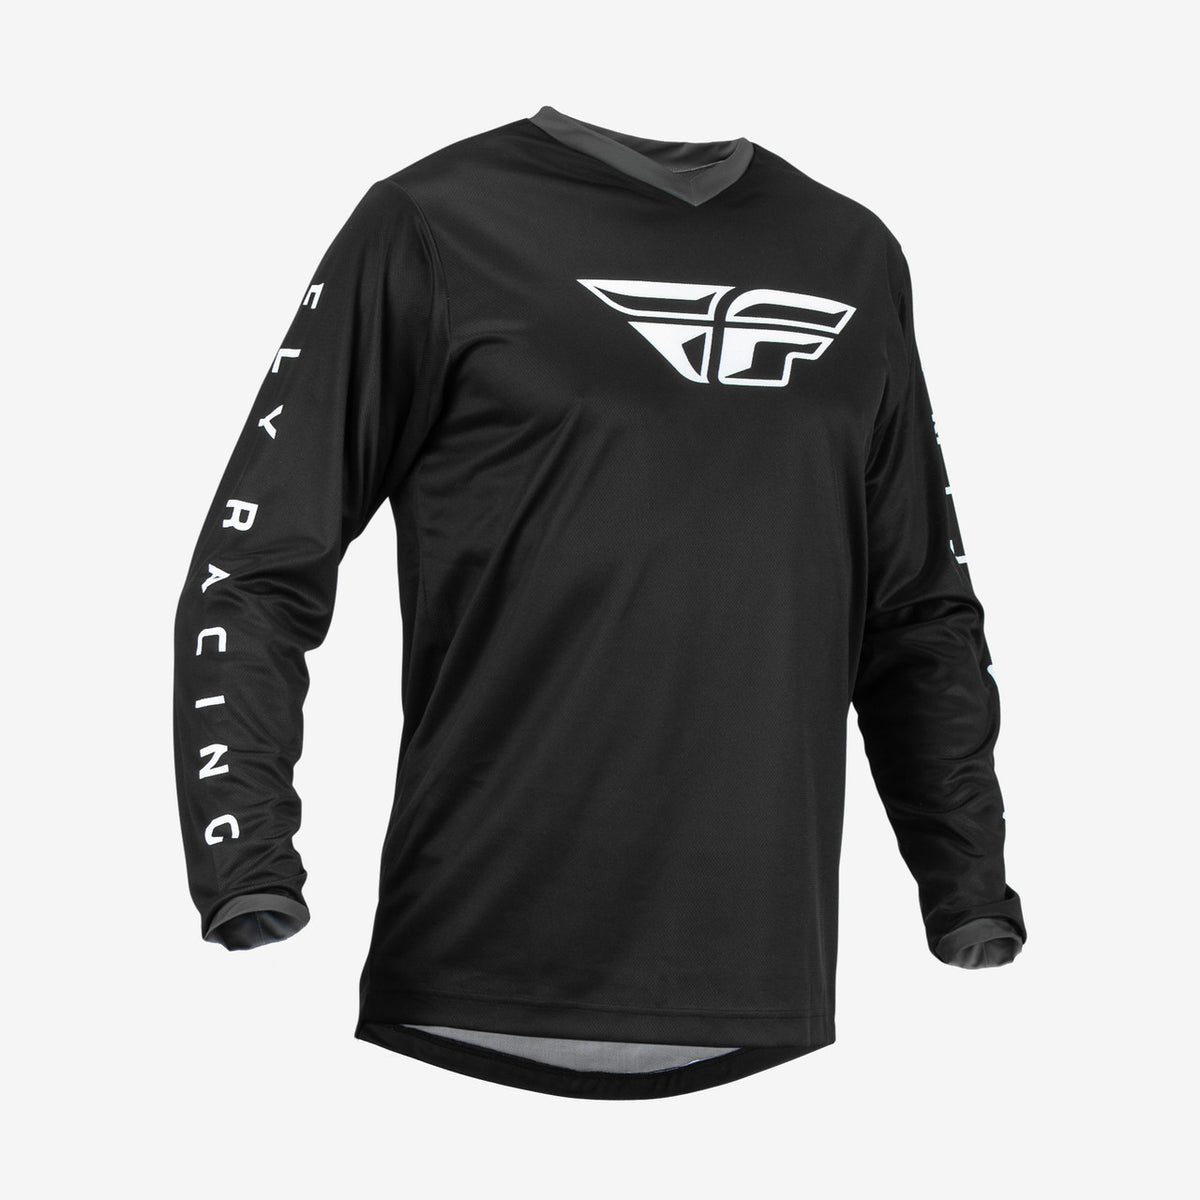 Maillot Cross Fly Racing F-16